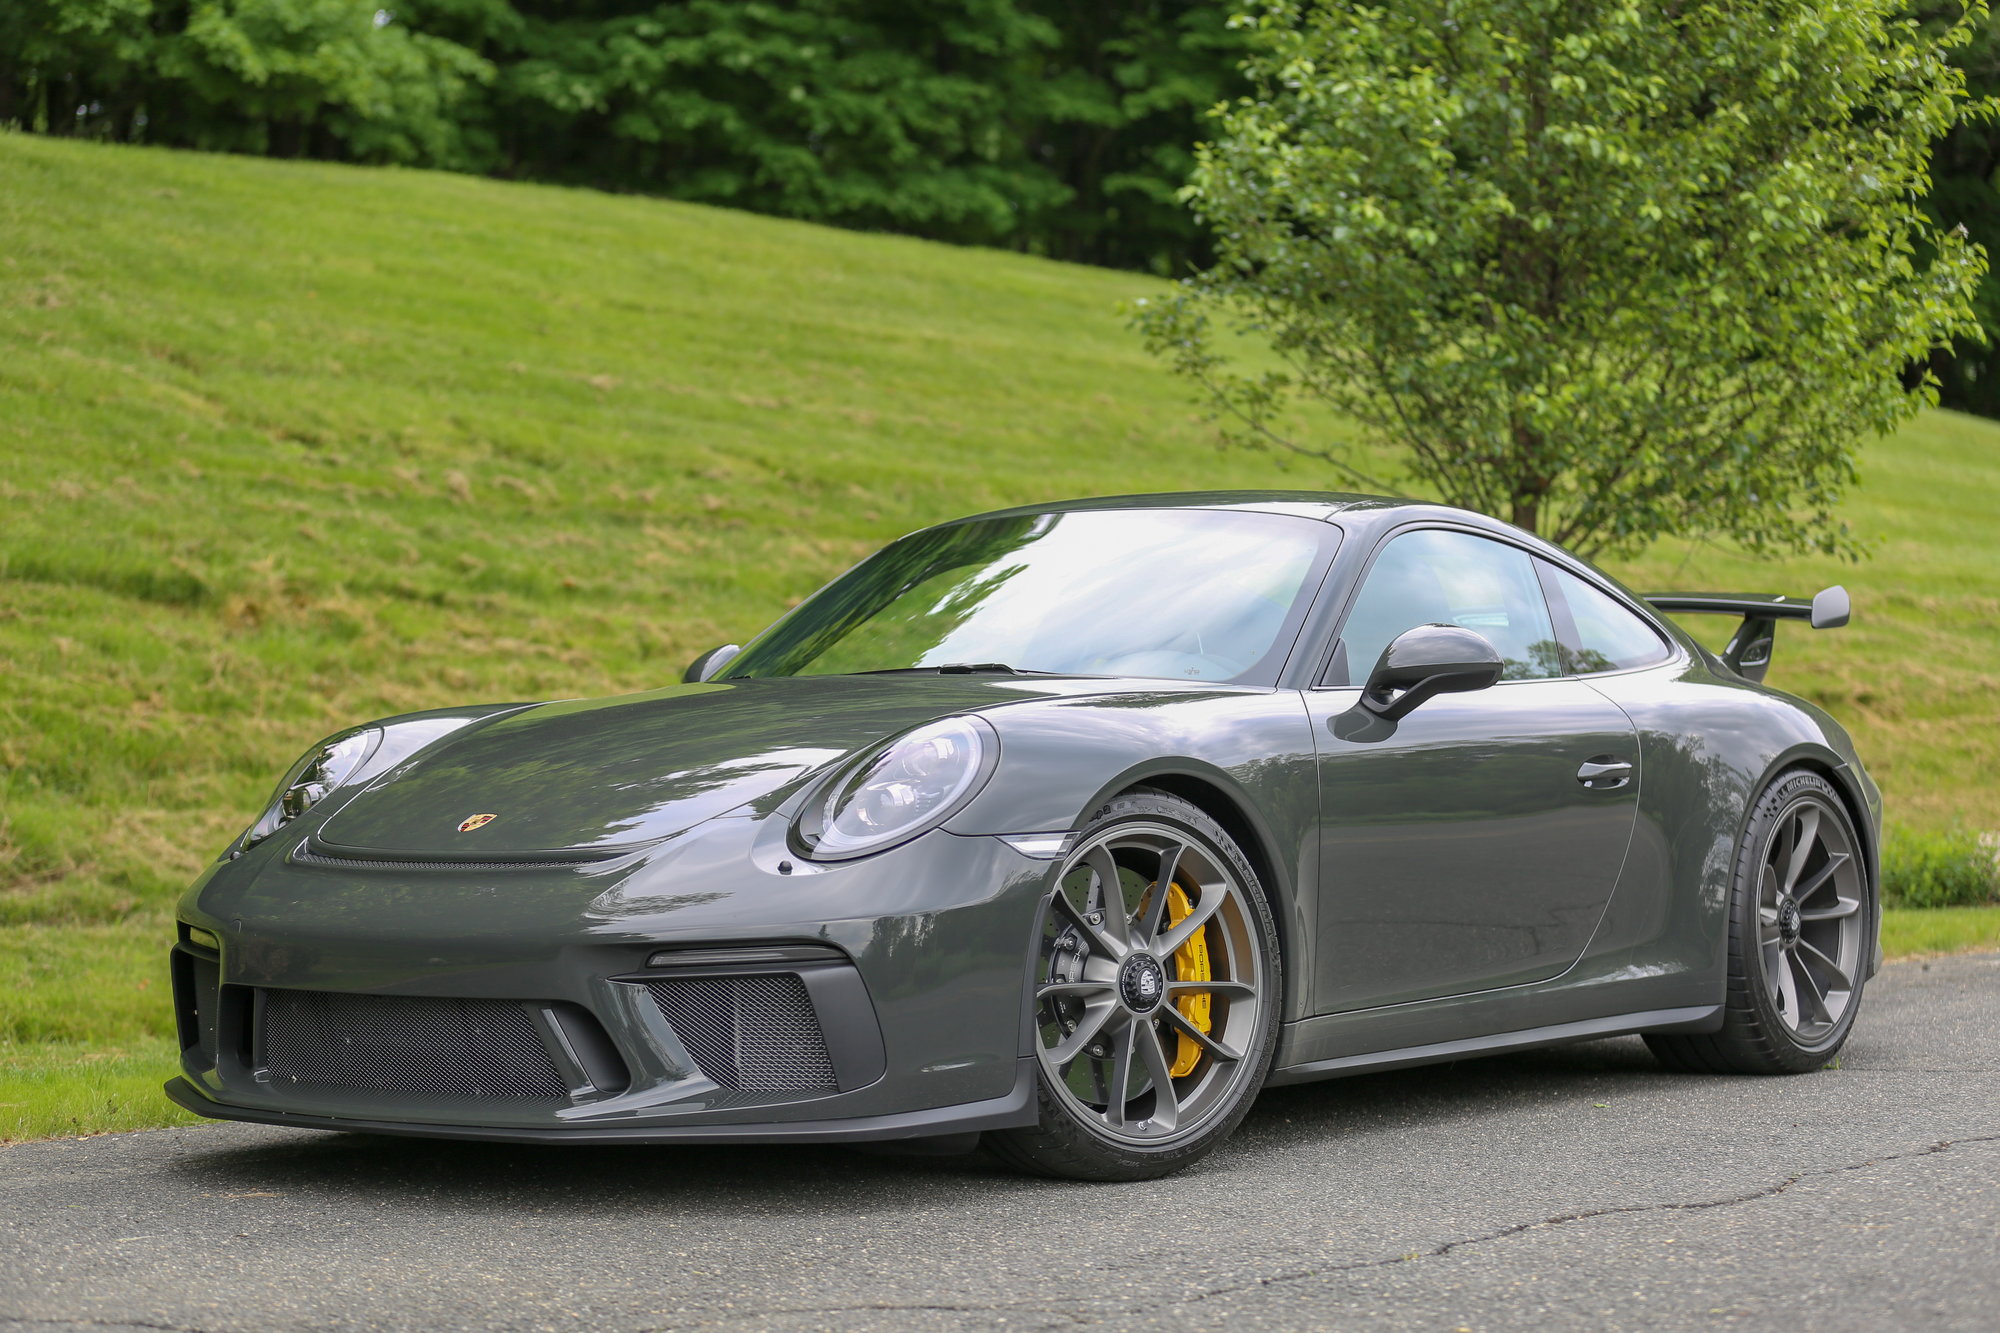 2018 Porsche 911 - Better than new Slate Grey 6MT GT3 - Used - VIN WP0AC2A95JS174978 - 2,800 Miles - 6 cyl - 2WD - Manual - Coupe - Gray - Ridgefield, CT 06877, United States